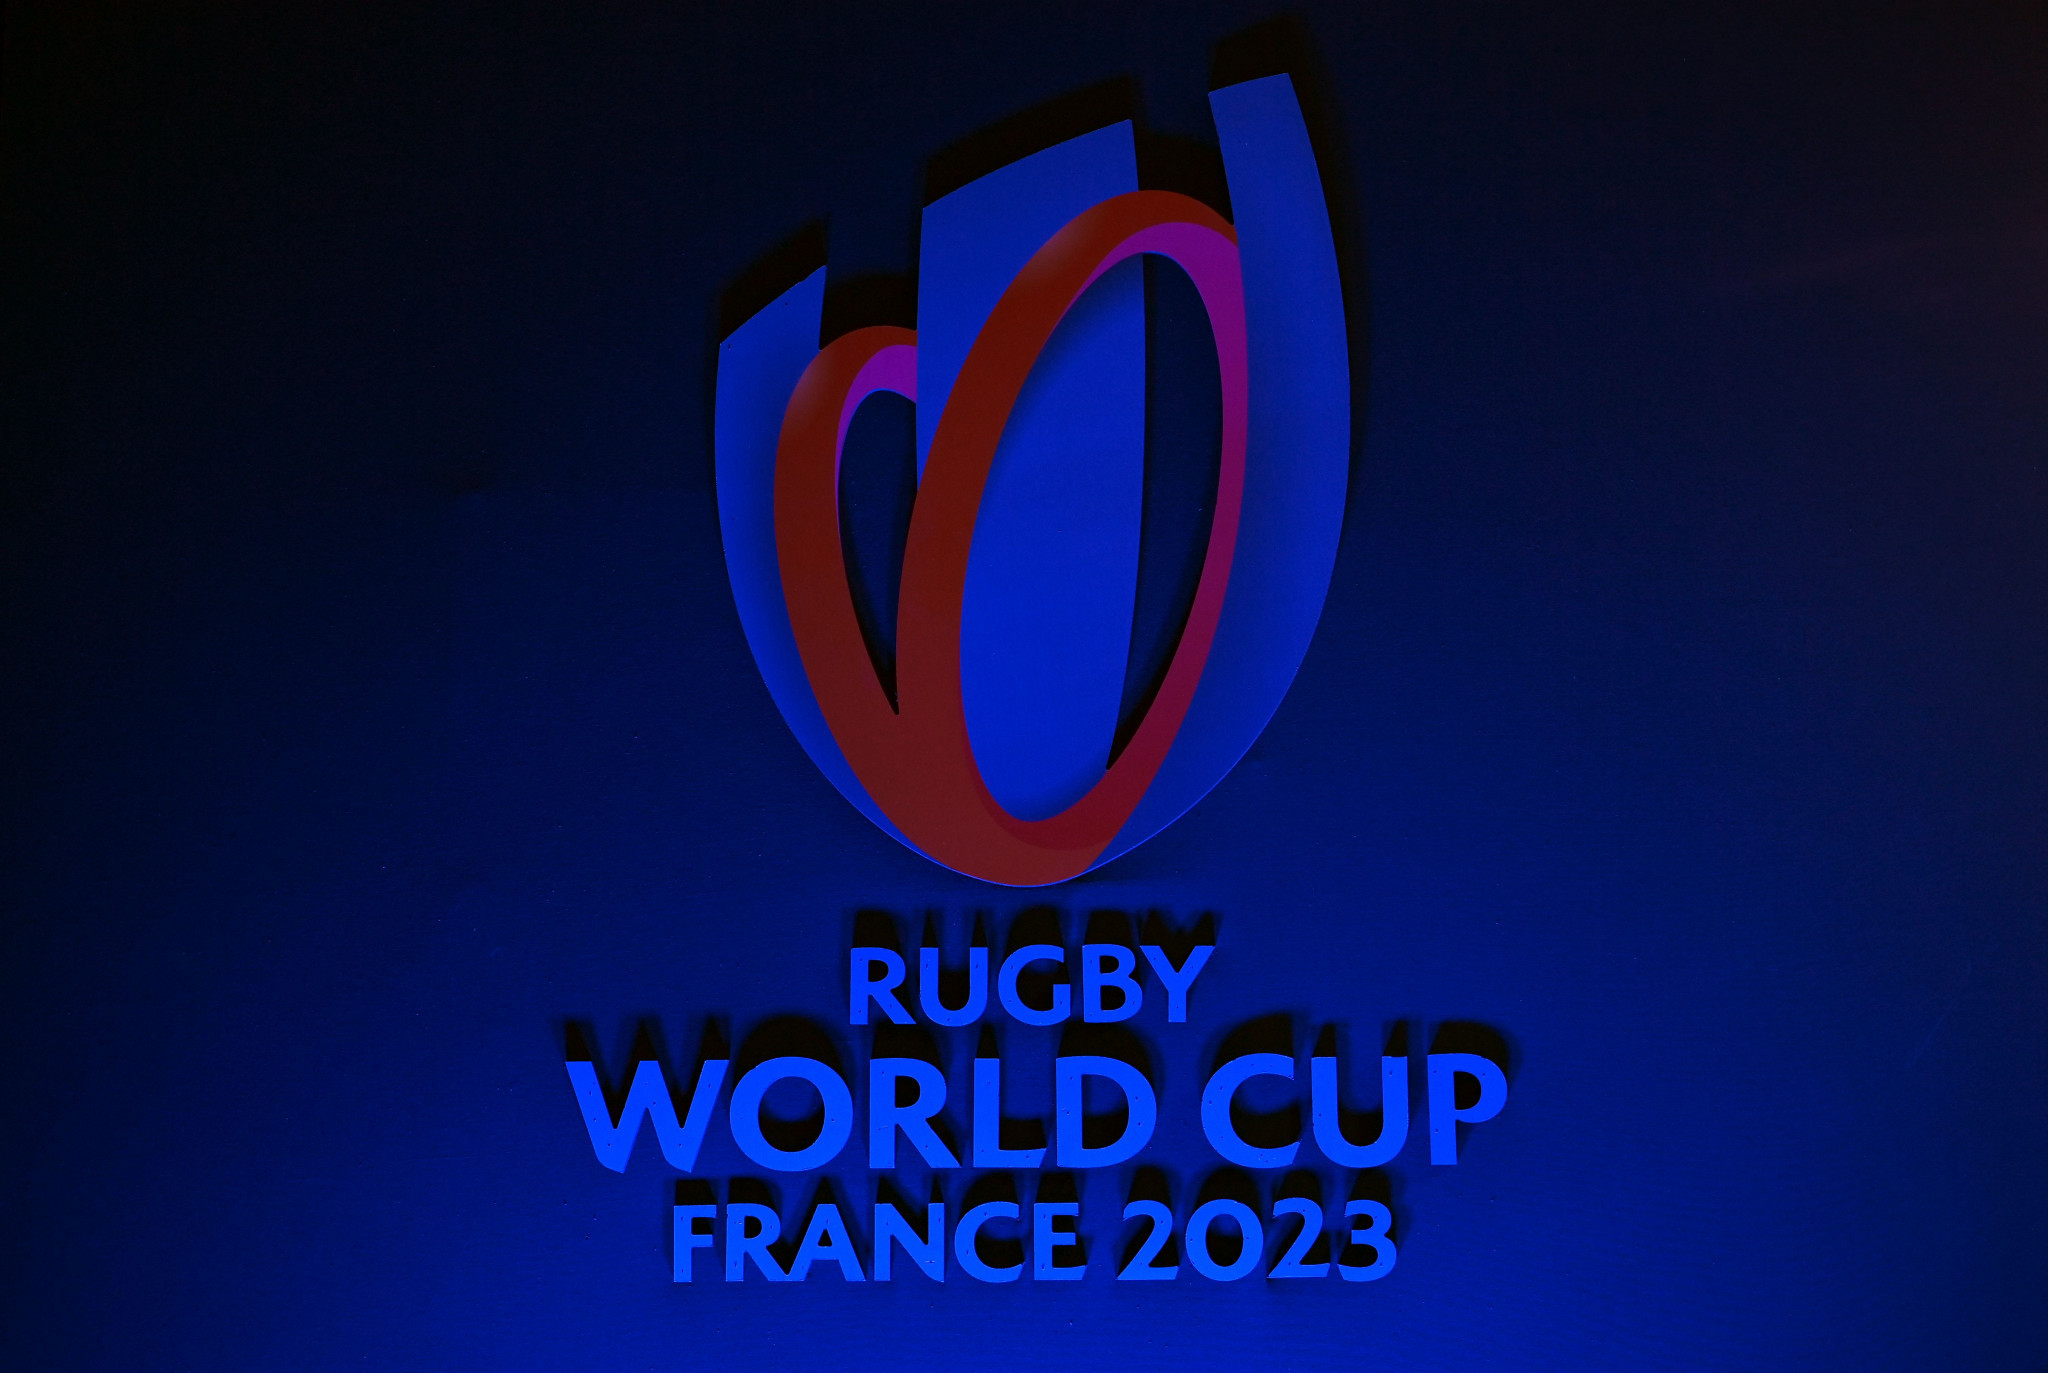 International Wheelchair Rugby Cup to be held in parallel with France 2023 Rugby World Cup